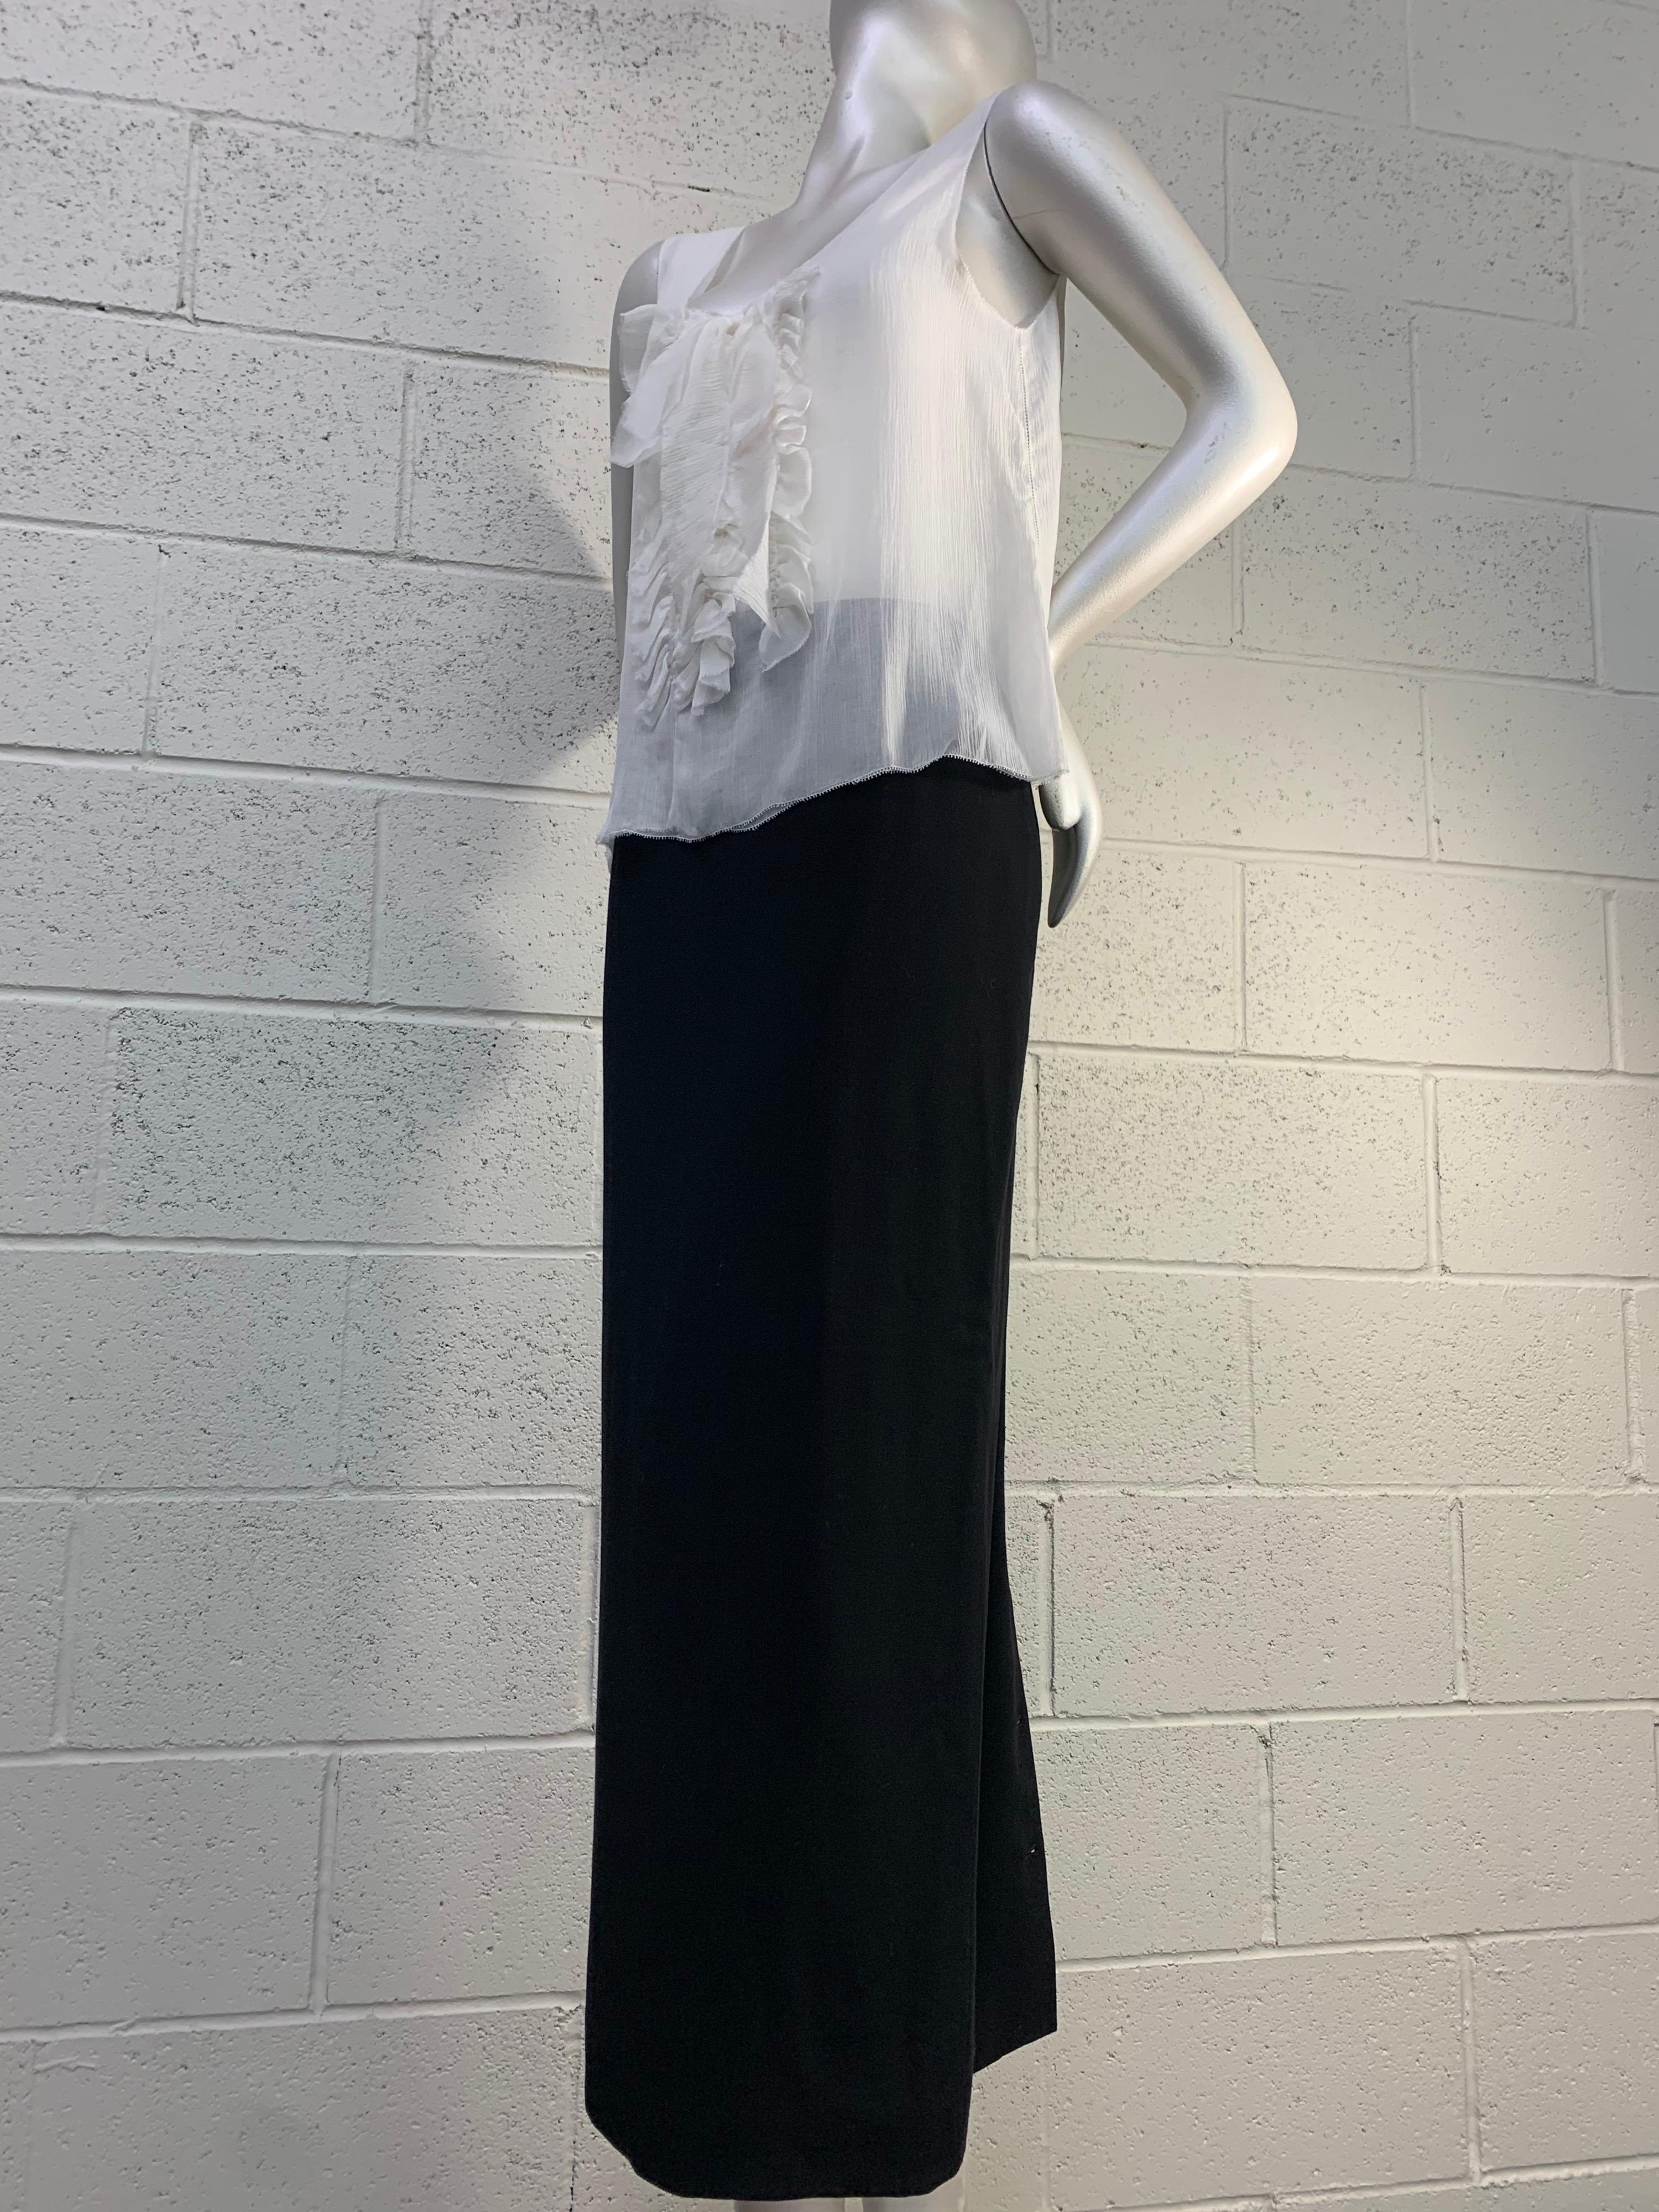 1998 Chanel Autumn Black Wool Crepe Pencil Skirt and White Silk Ruffled Camisole In Excellent Condition For Sale In Gresham, OR